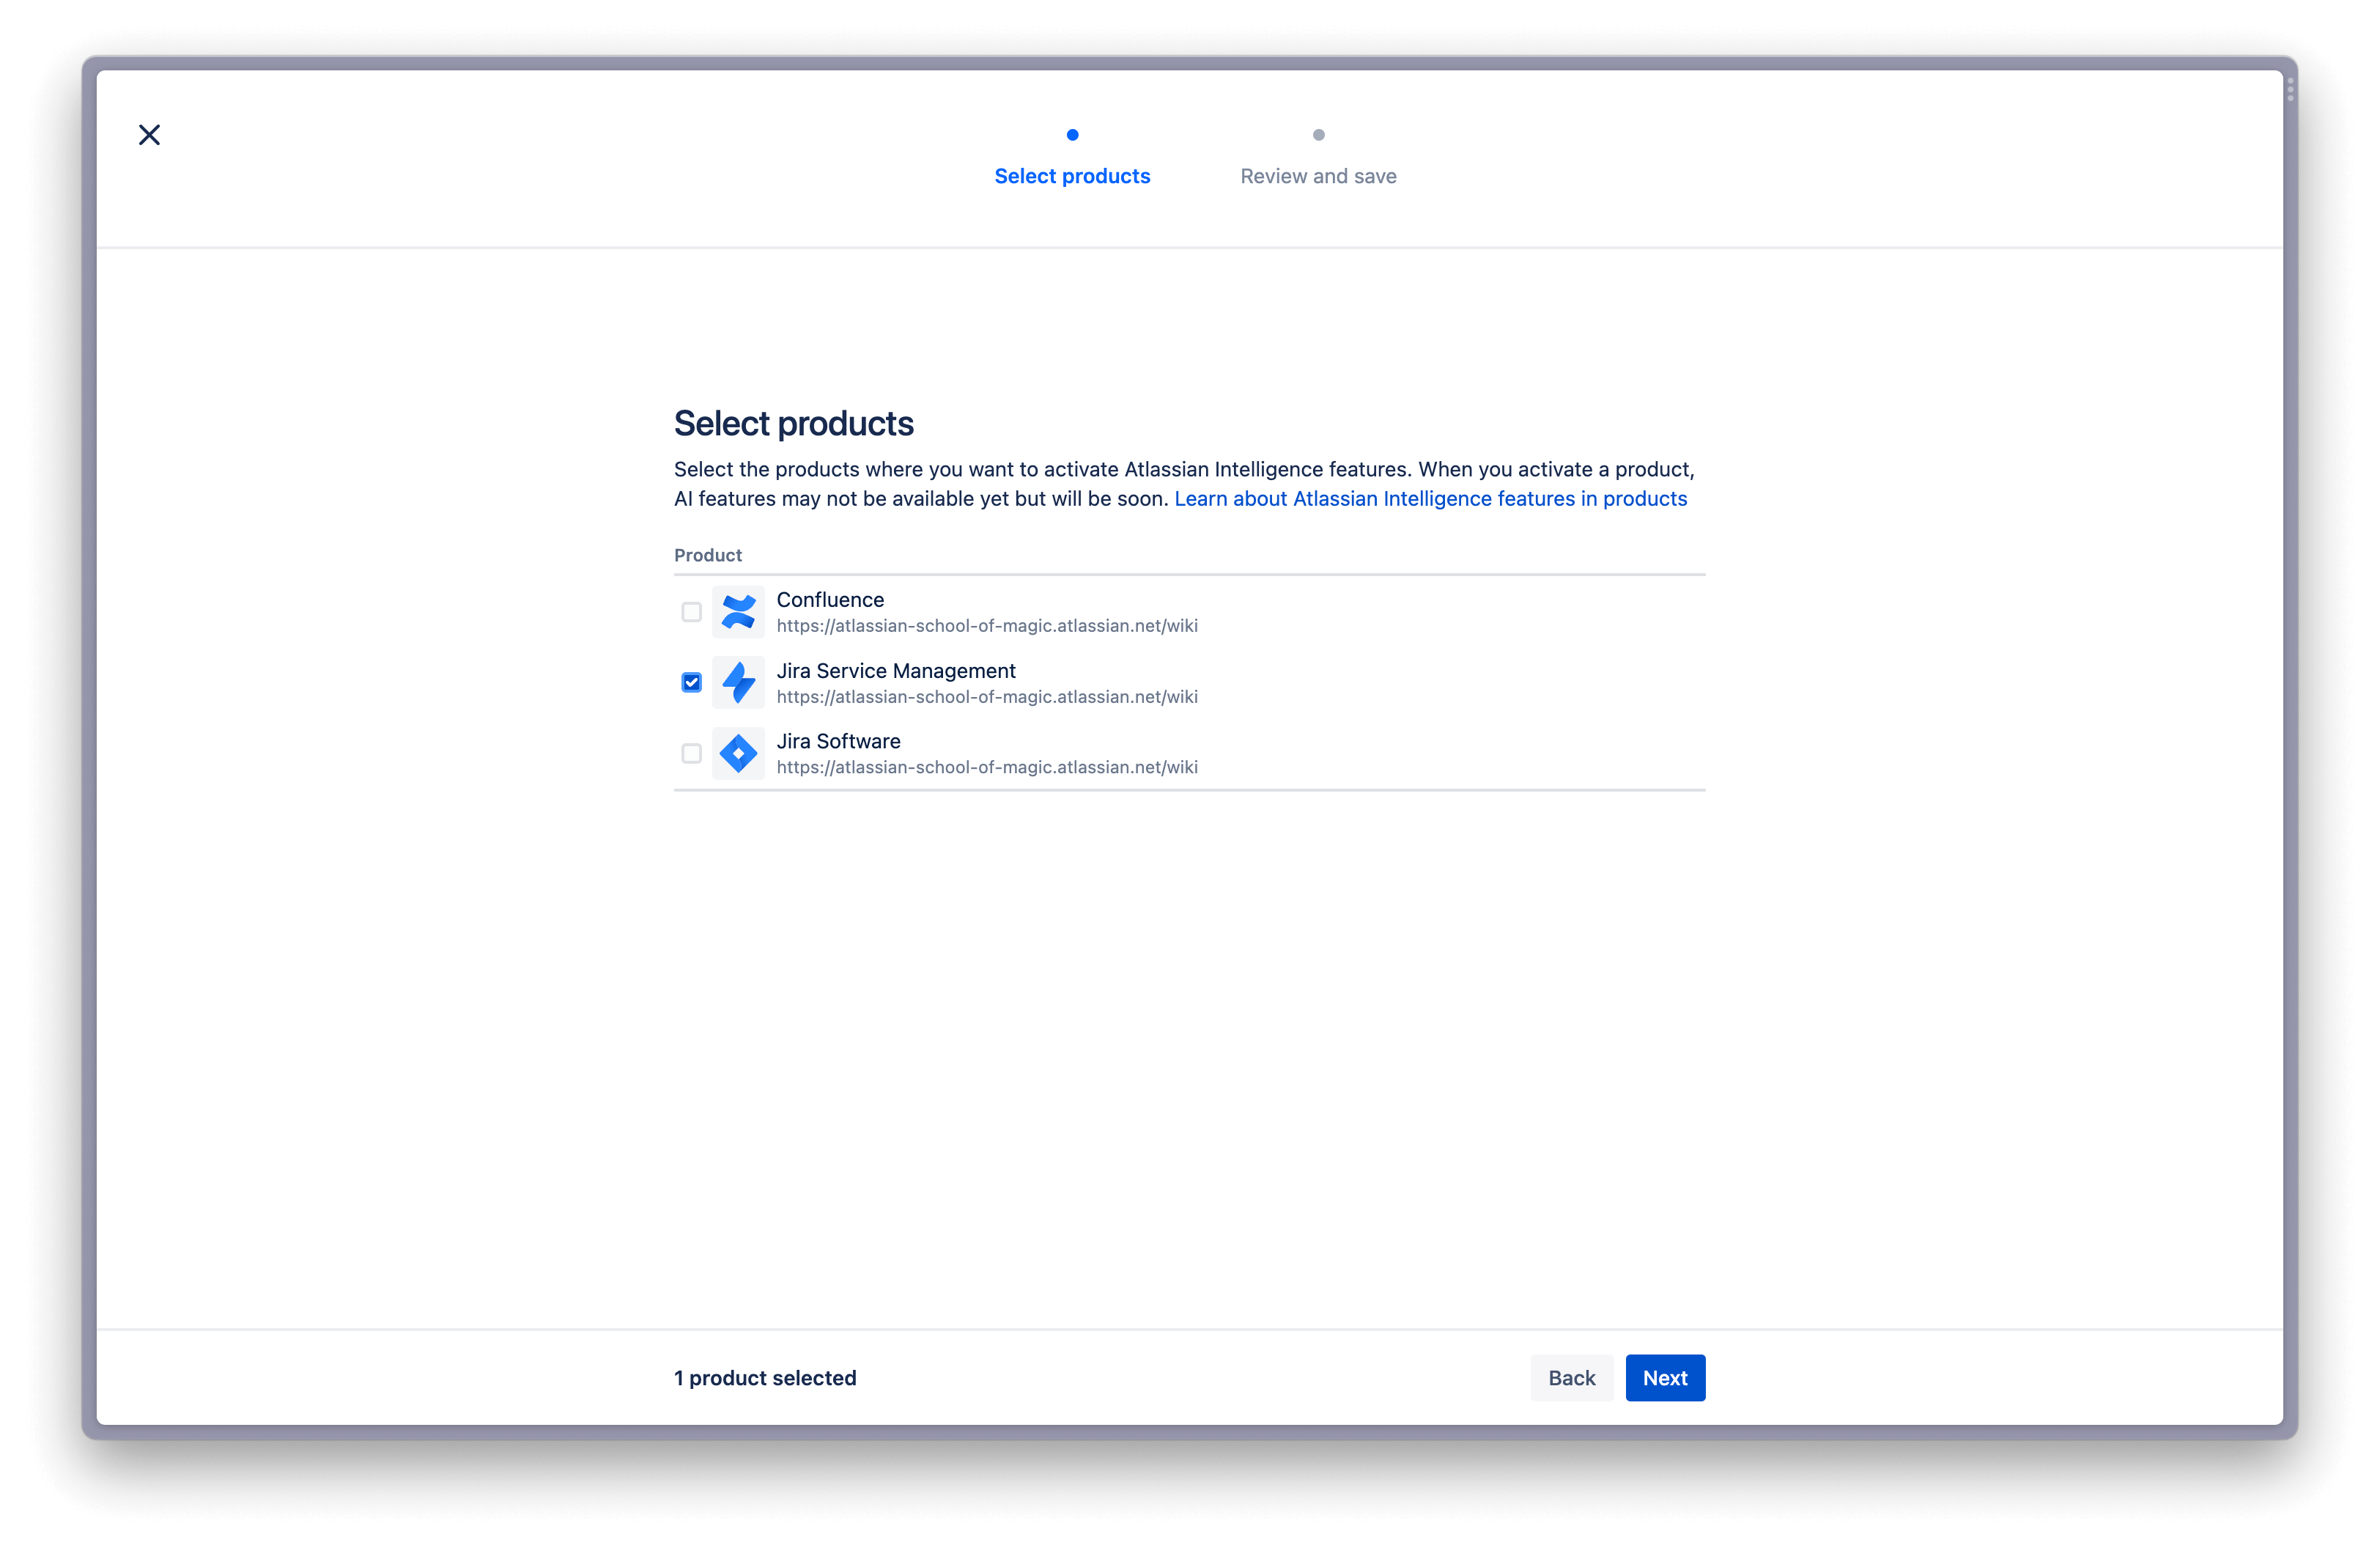 Product selection screen to activate Atlassian Intelligence